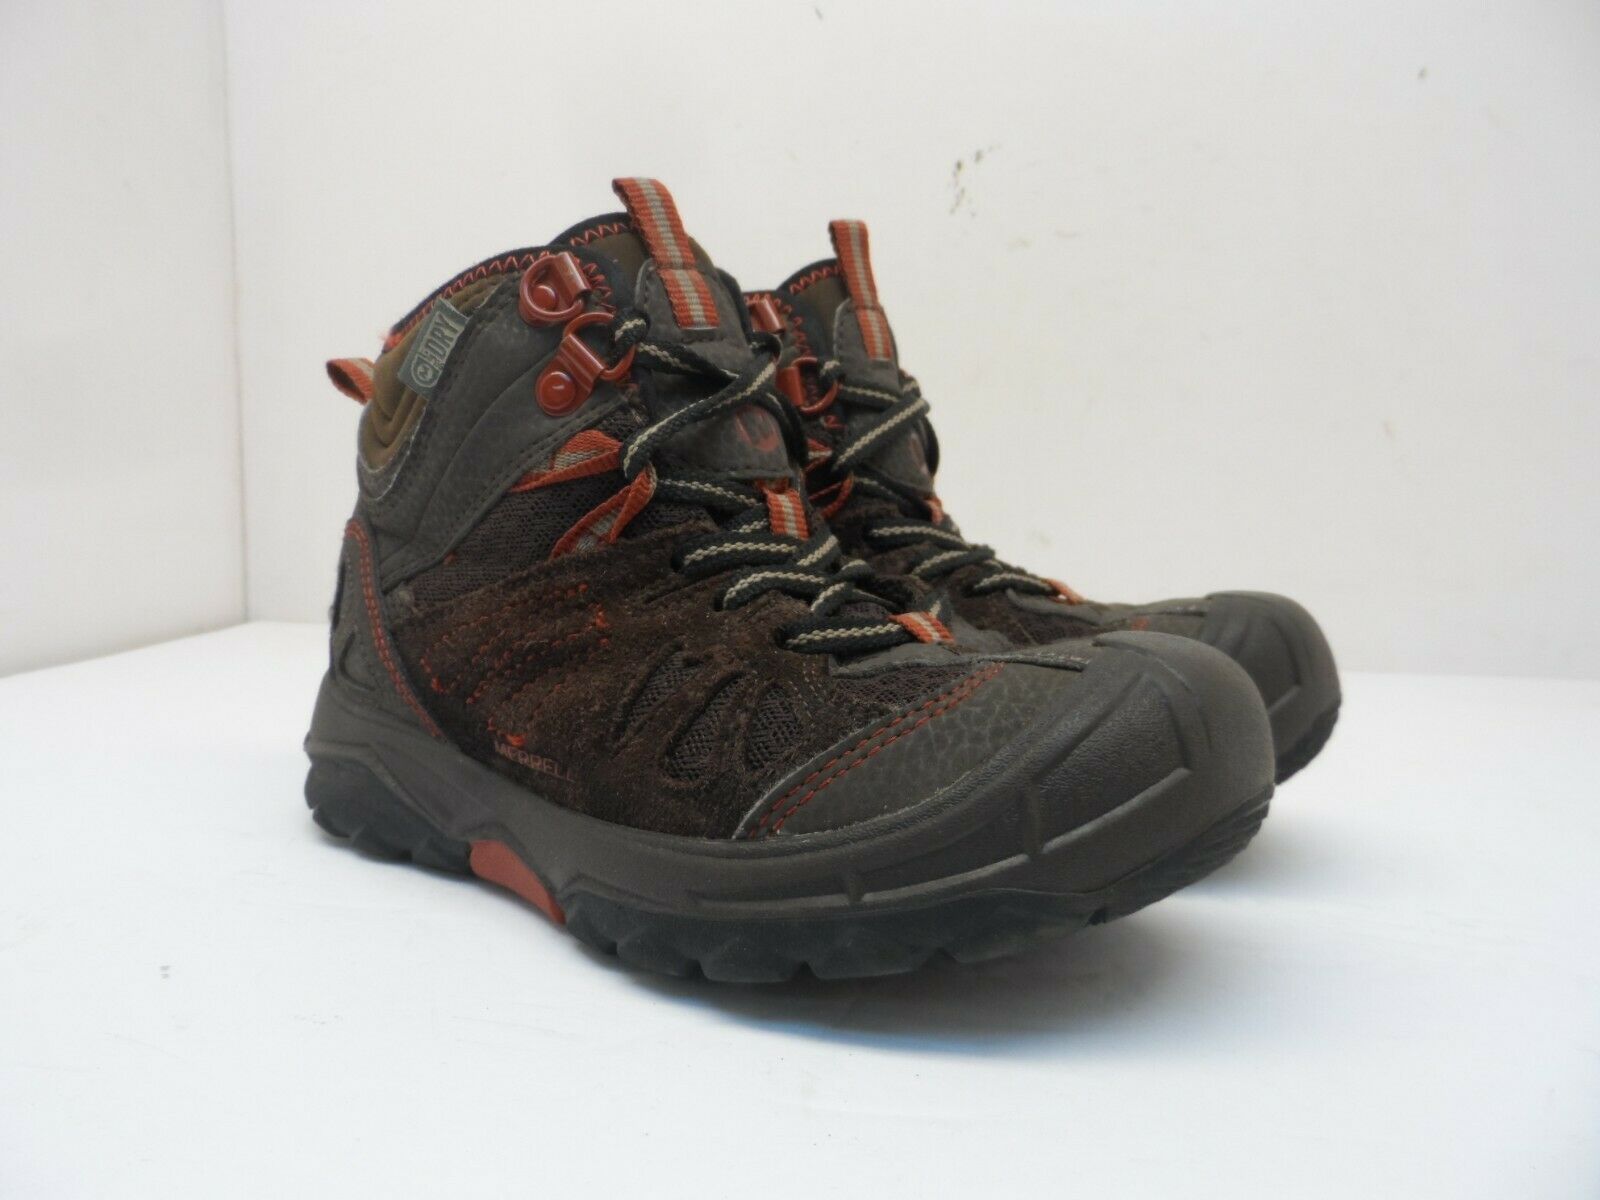 Merrell Kid's Mid-Cut Capra Waterproof Casual Hiking Boots Brown/Red Size 12M - $56.99